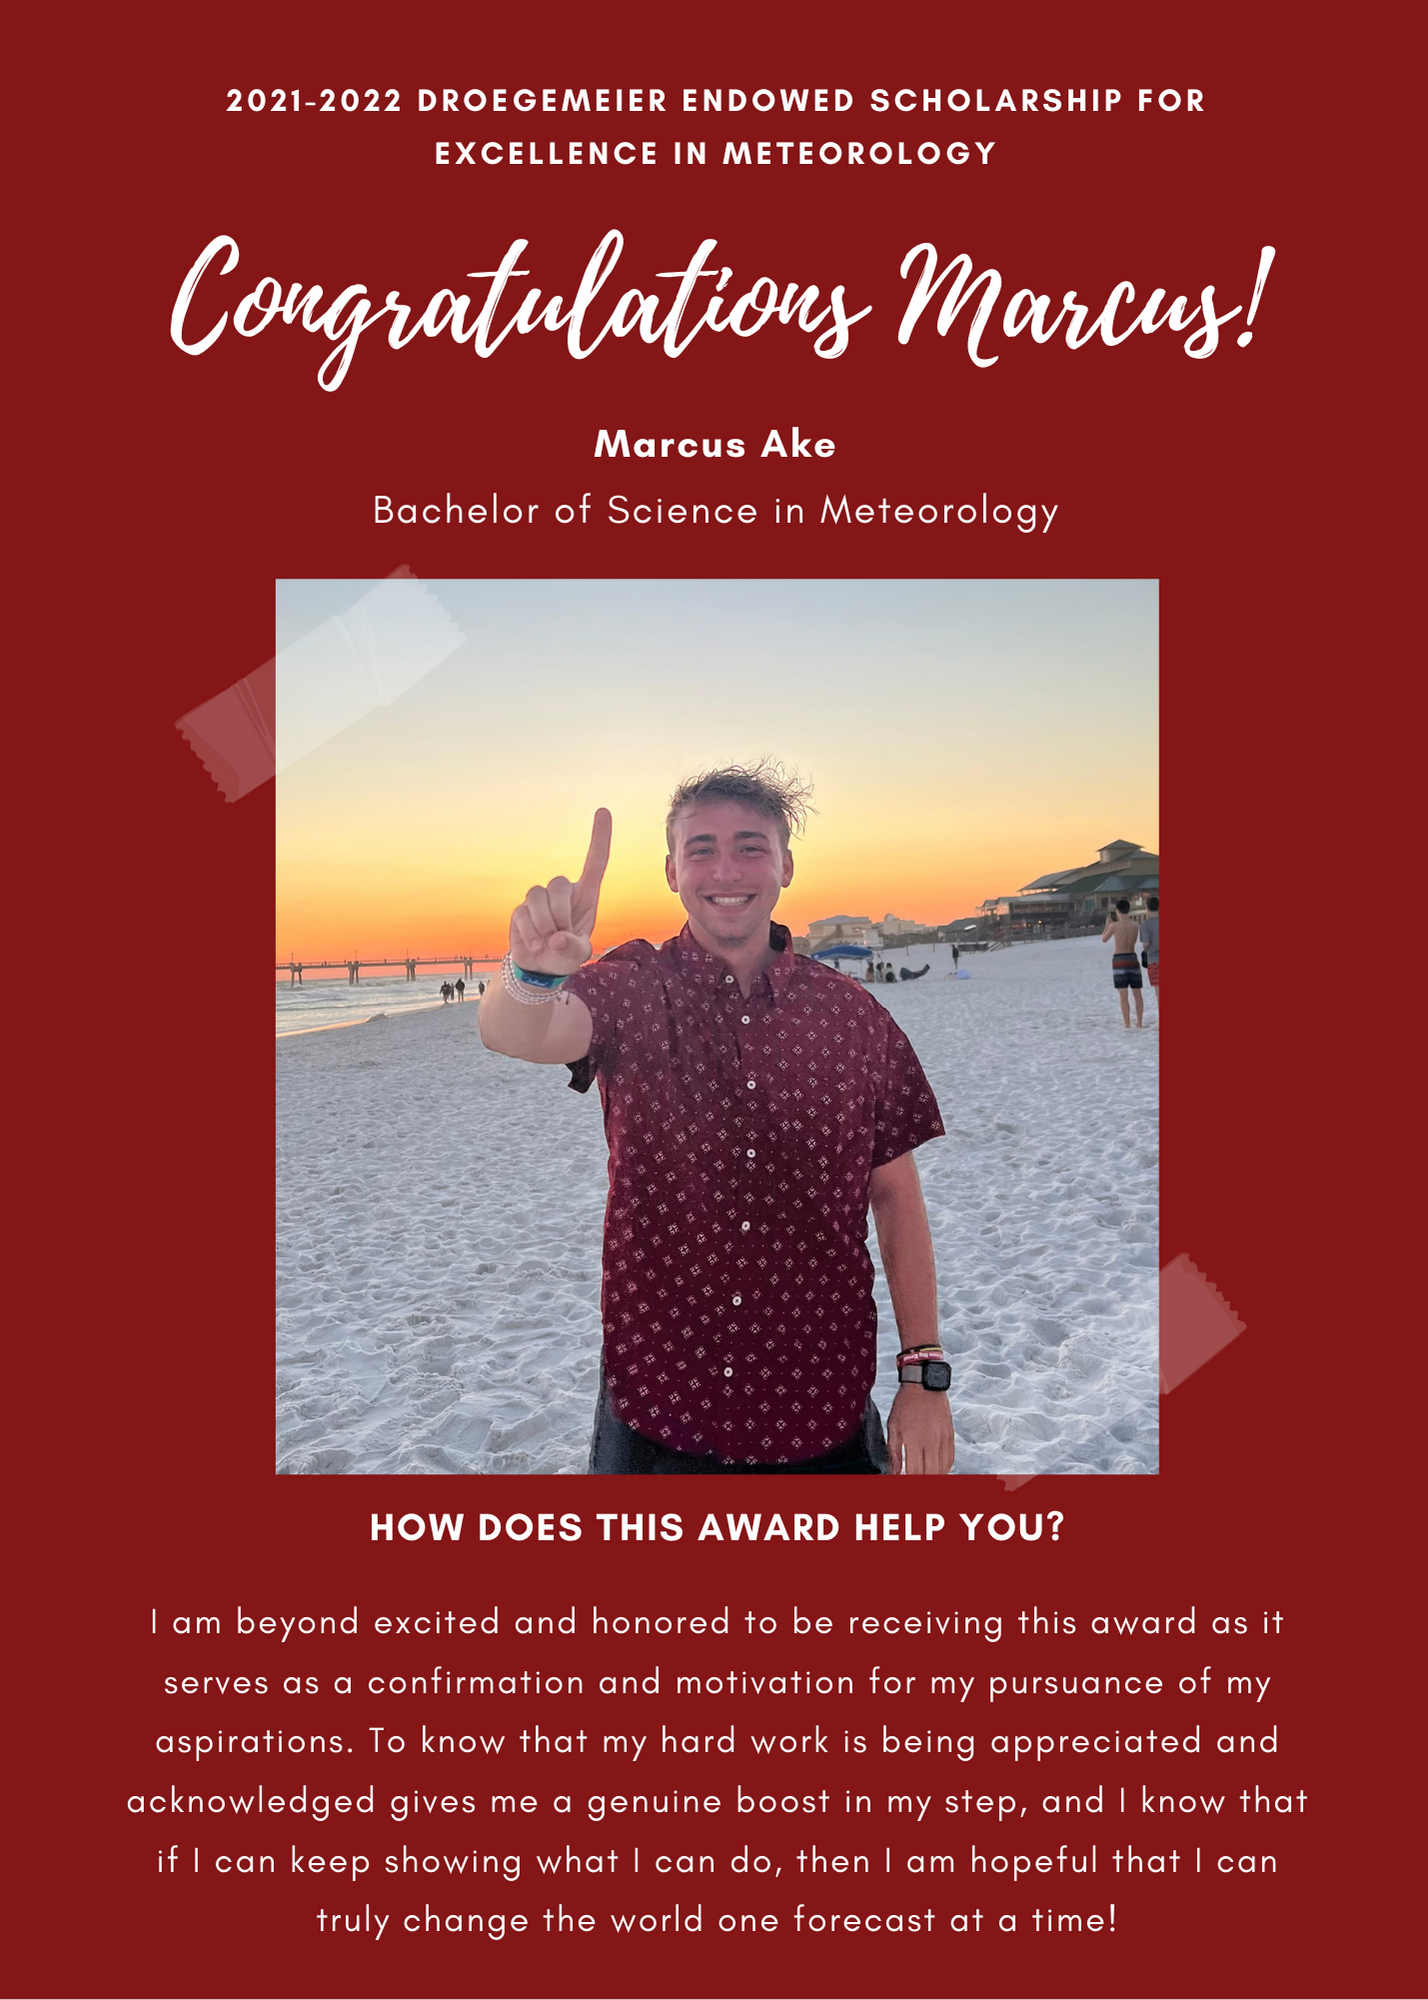 2021 -2022 A&GS Droegemeier Endowed Scholarship for Excellence in Meteorology. Congratulations Marcus! Marcus Ake Bachelor of Science in Meteorology.  How does this award help you? I am beyond excited and honored to be receiving this award as it serves as a confirmation and motivation for my pursuace of my aspirations. To know that my hard work is being appreiated and acknowledged gives me a genuine boost in my step, and I know that if I can keep showing what I can do, then I am hopeful that I can truly change the world one forecast at a time!